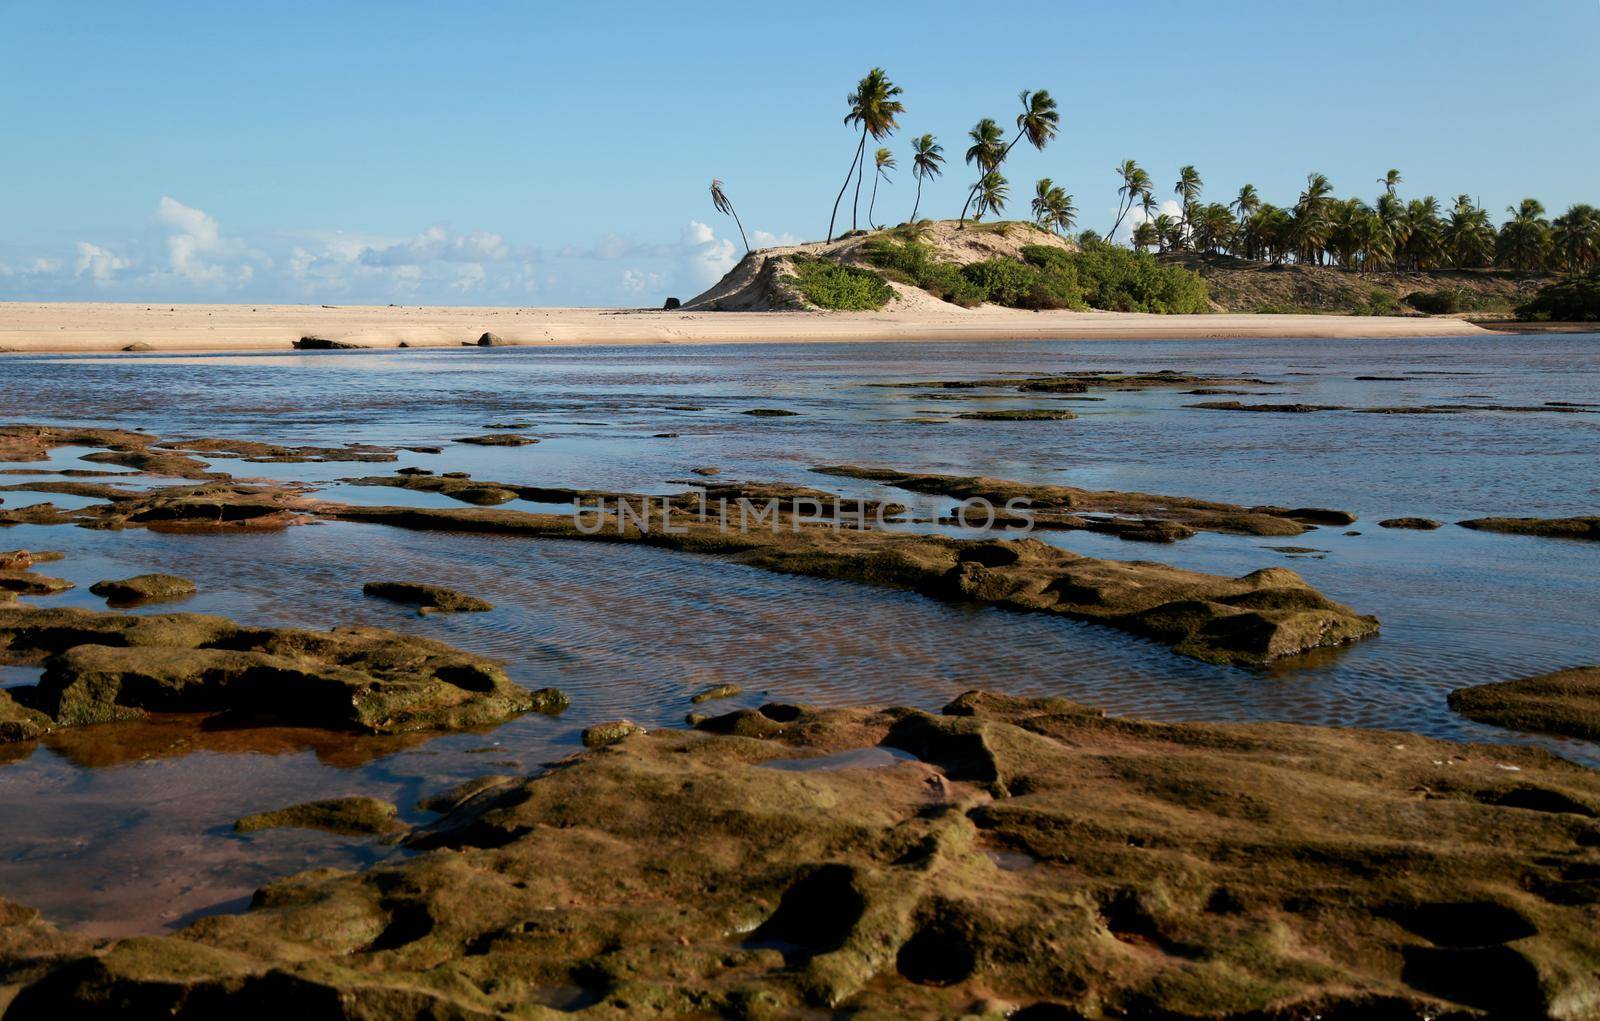 conder, bahia / brazil - september 9, 2012: Young man is seen at Barra do Itariri beach in the municipality of Conde, north coast of Bahia.

